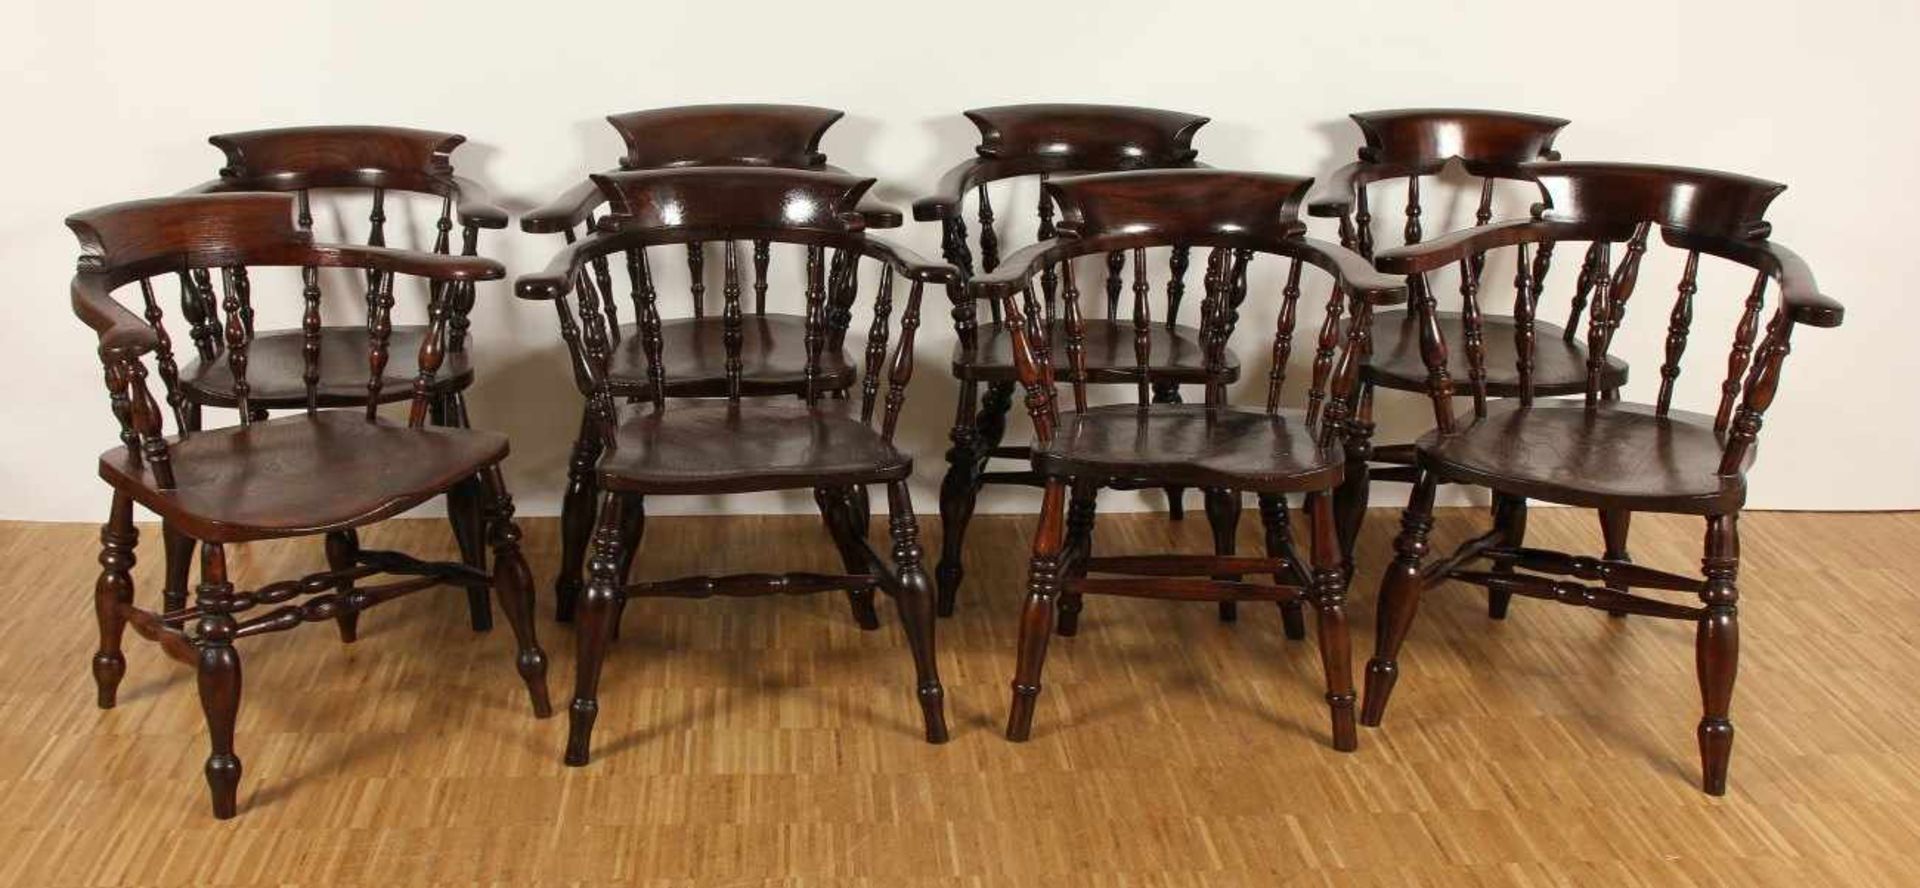 ACHT CAPTAIN'S CHAIRS, Eiche/Rüster, H 82, ENGLAND, 2.H.19.Jh.